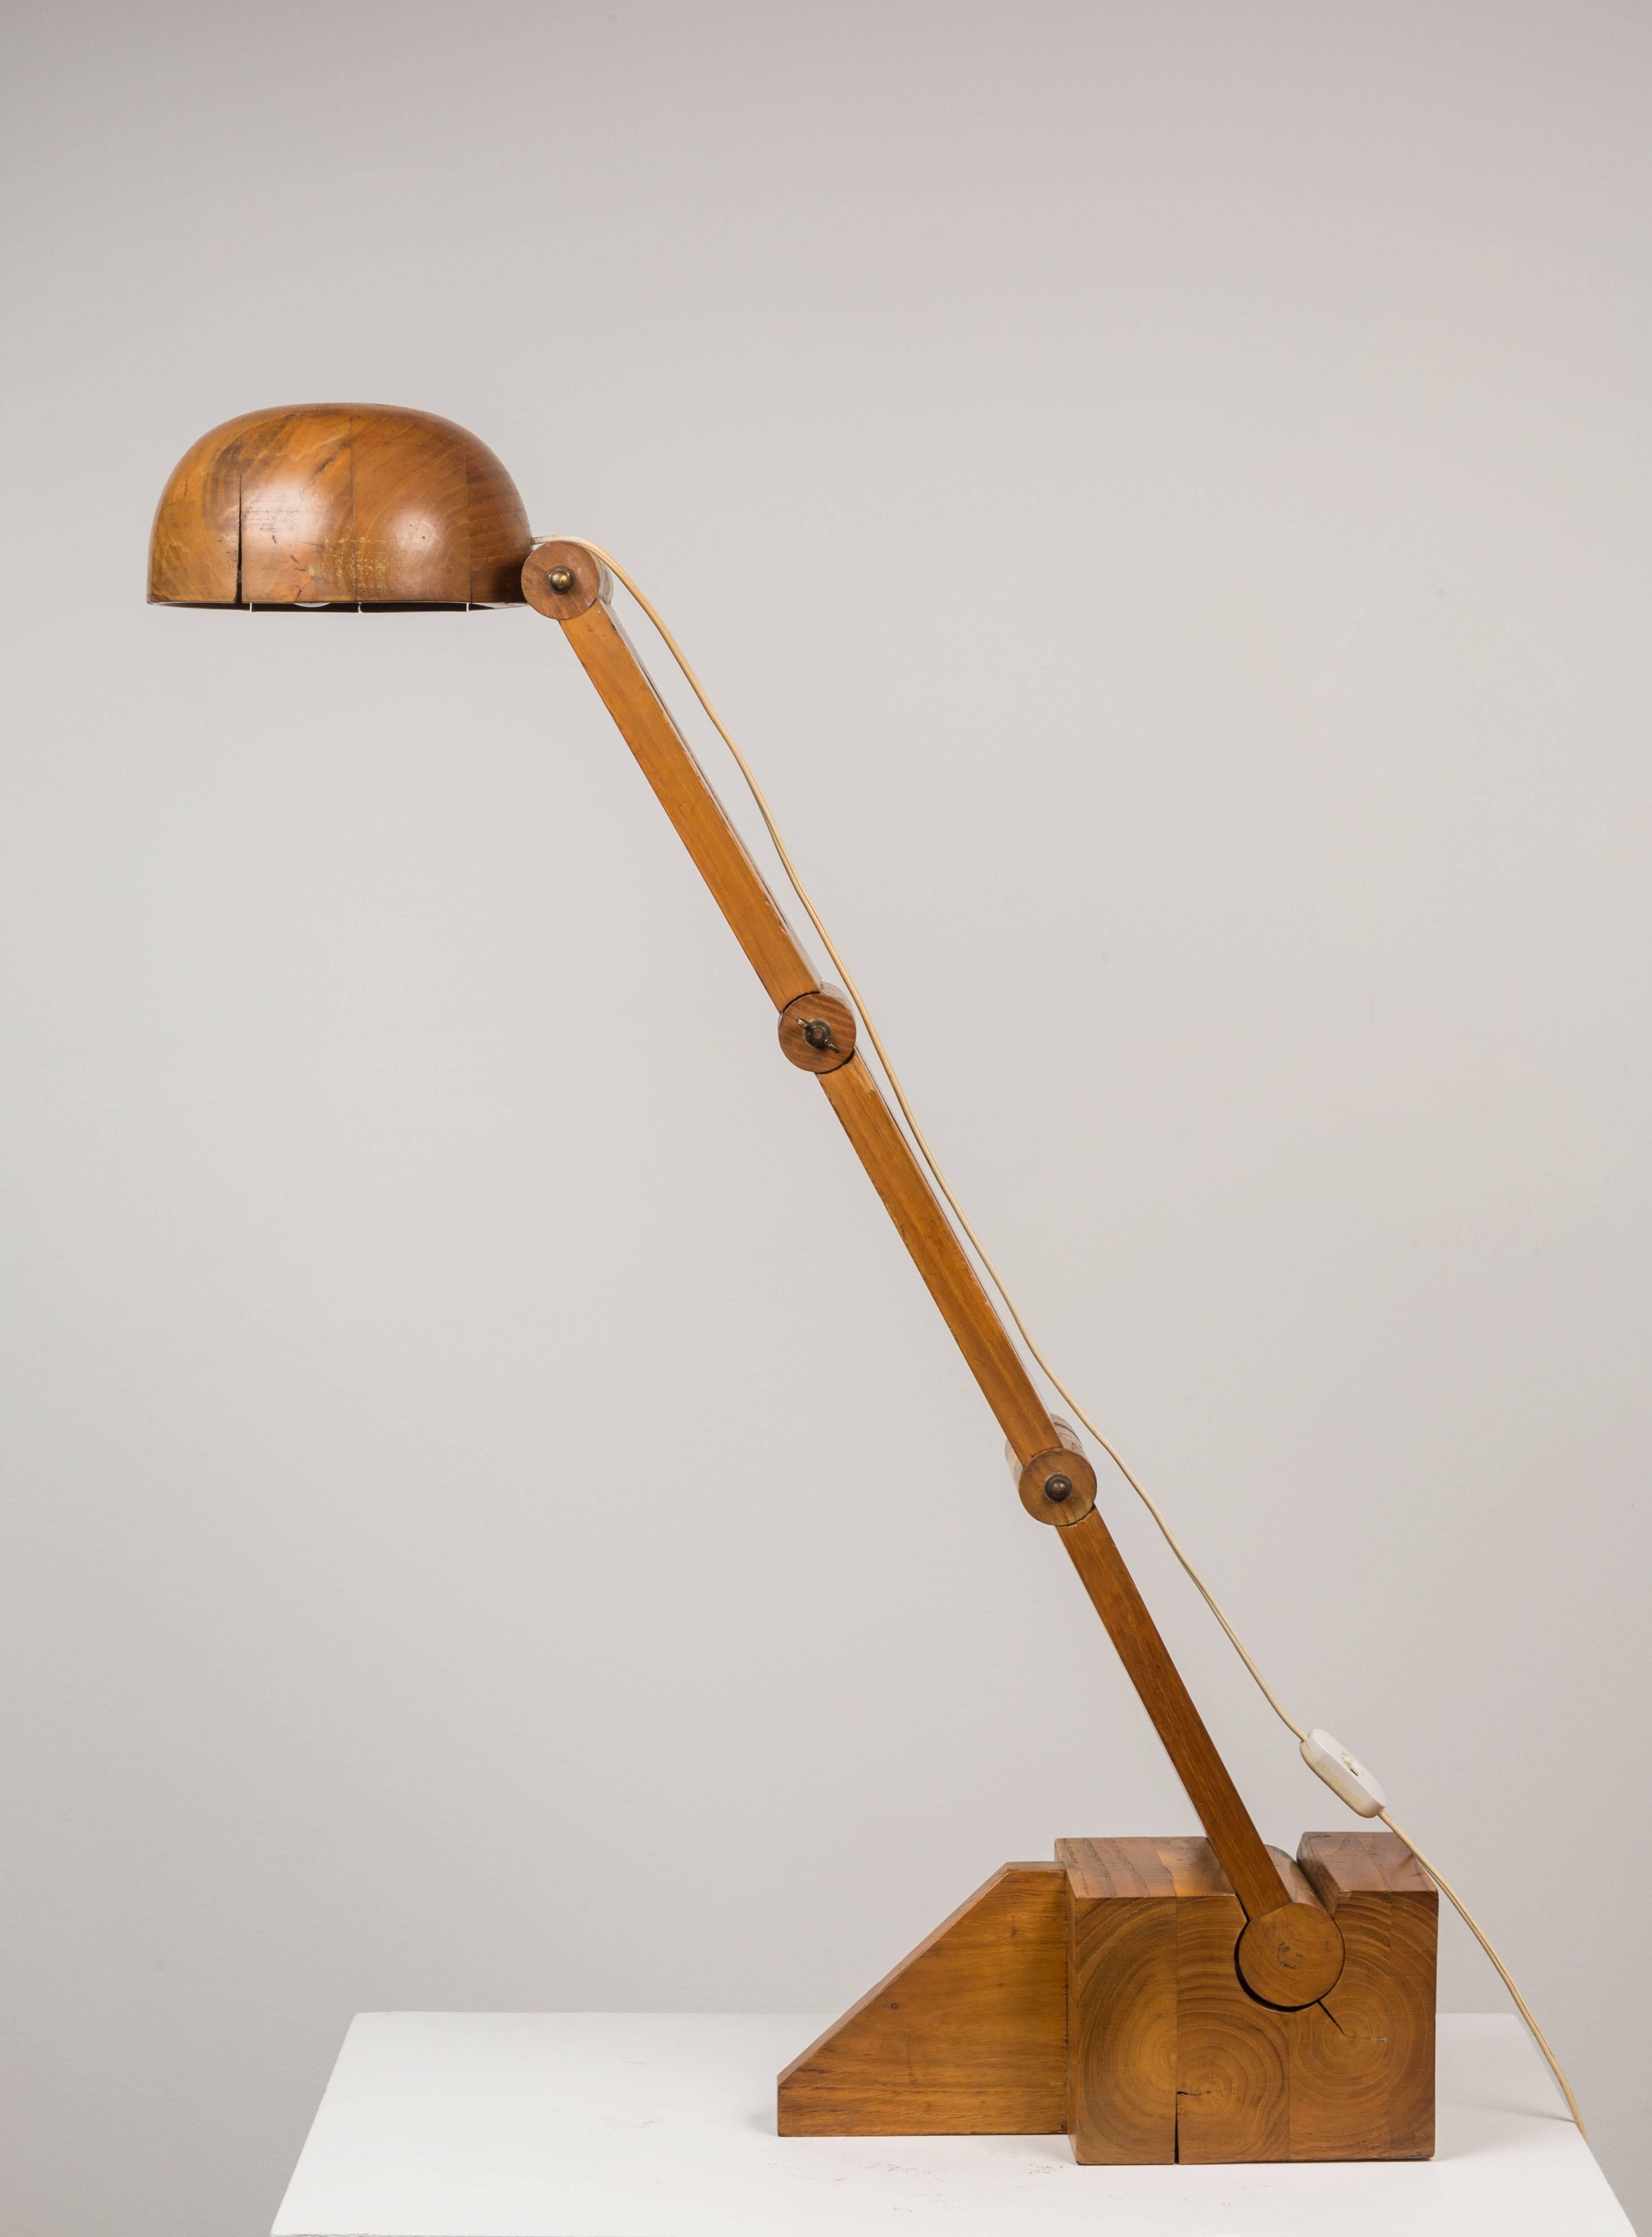 Solid wood table lamp designed in the 1960s by Paolo Pallucco for Pallucco Roma. Arm of lamp moves forwards/backwards and adjust to various positions at the joints. Retains original label. Original wiring. Takes an E27 60w maximum bulb.